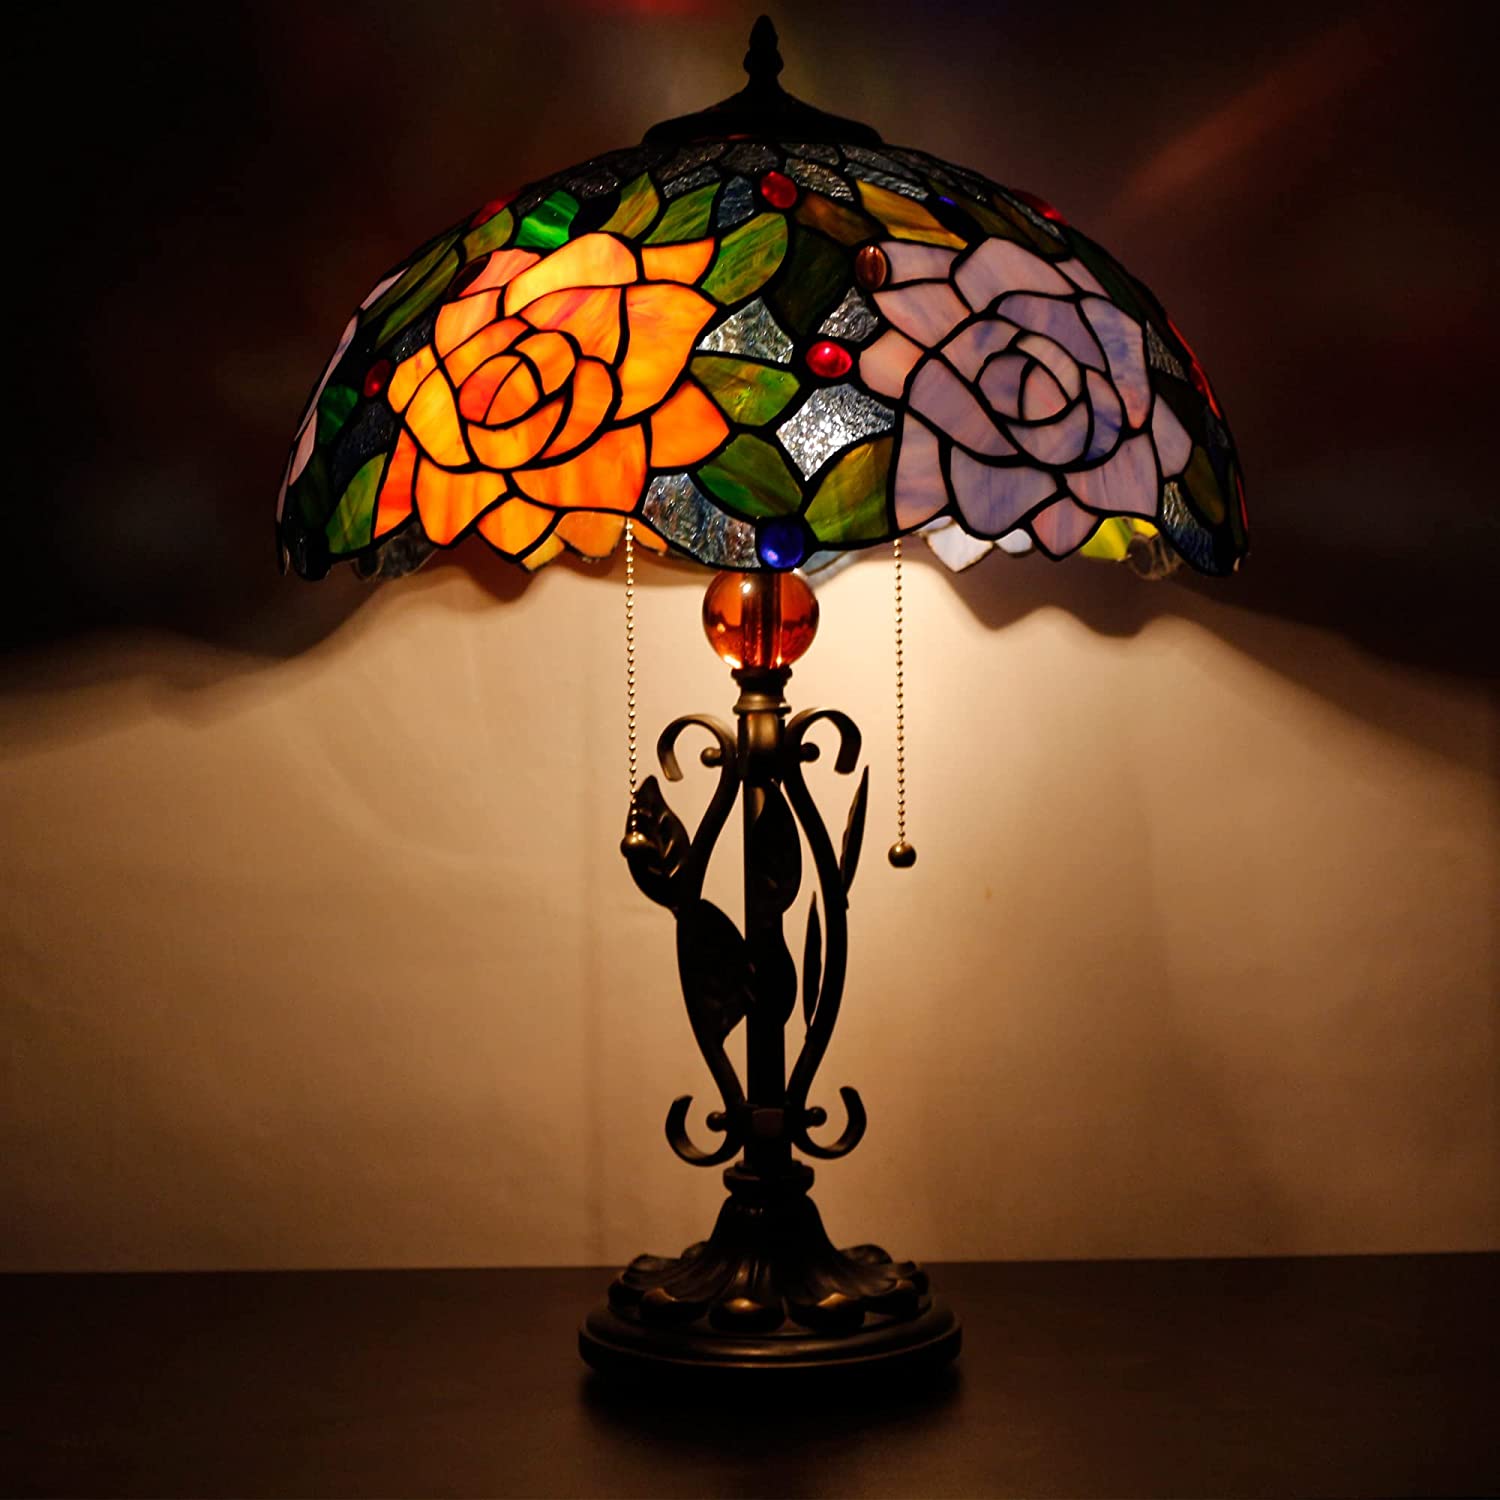 Tiffany Table Lamp Rose Stained Glass Desk Light W16H24 Inch with Iron Metal Leaves Style